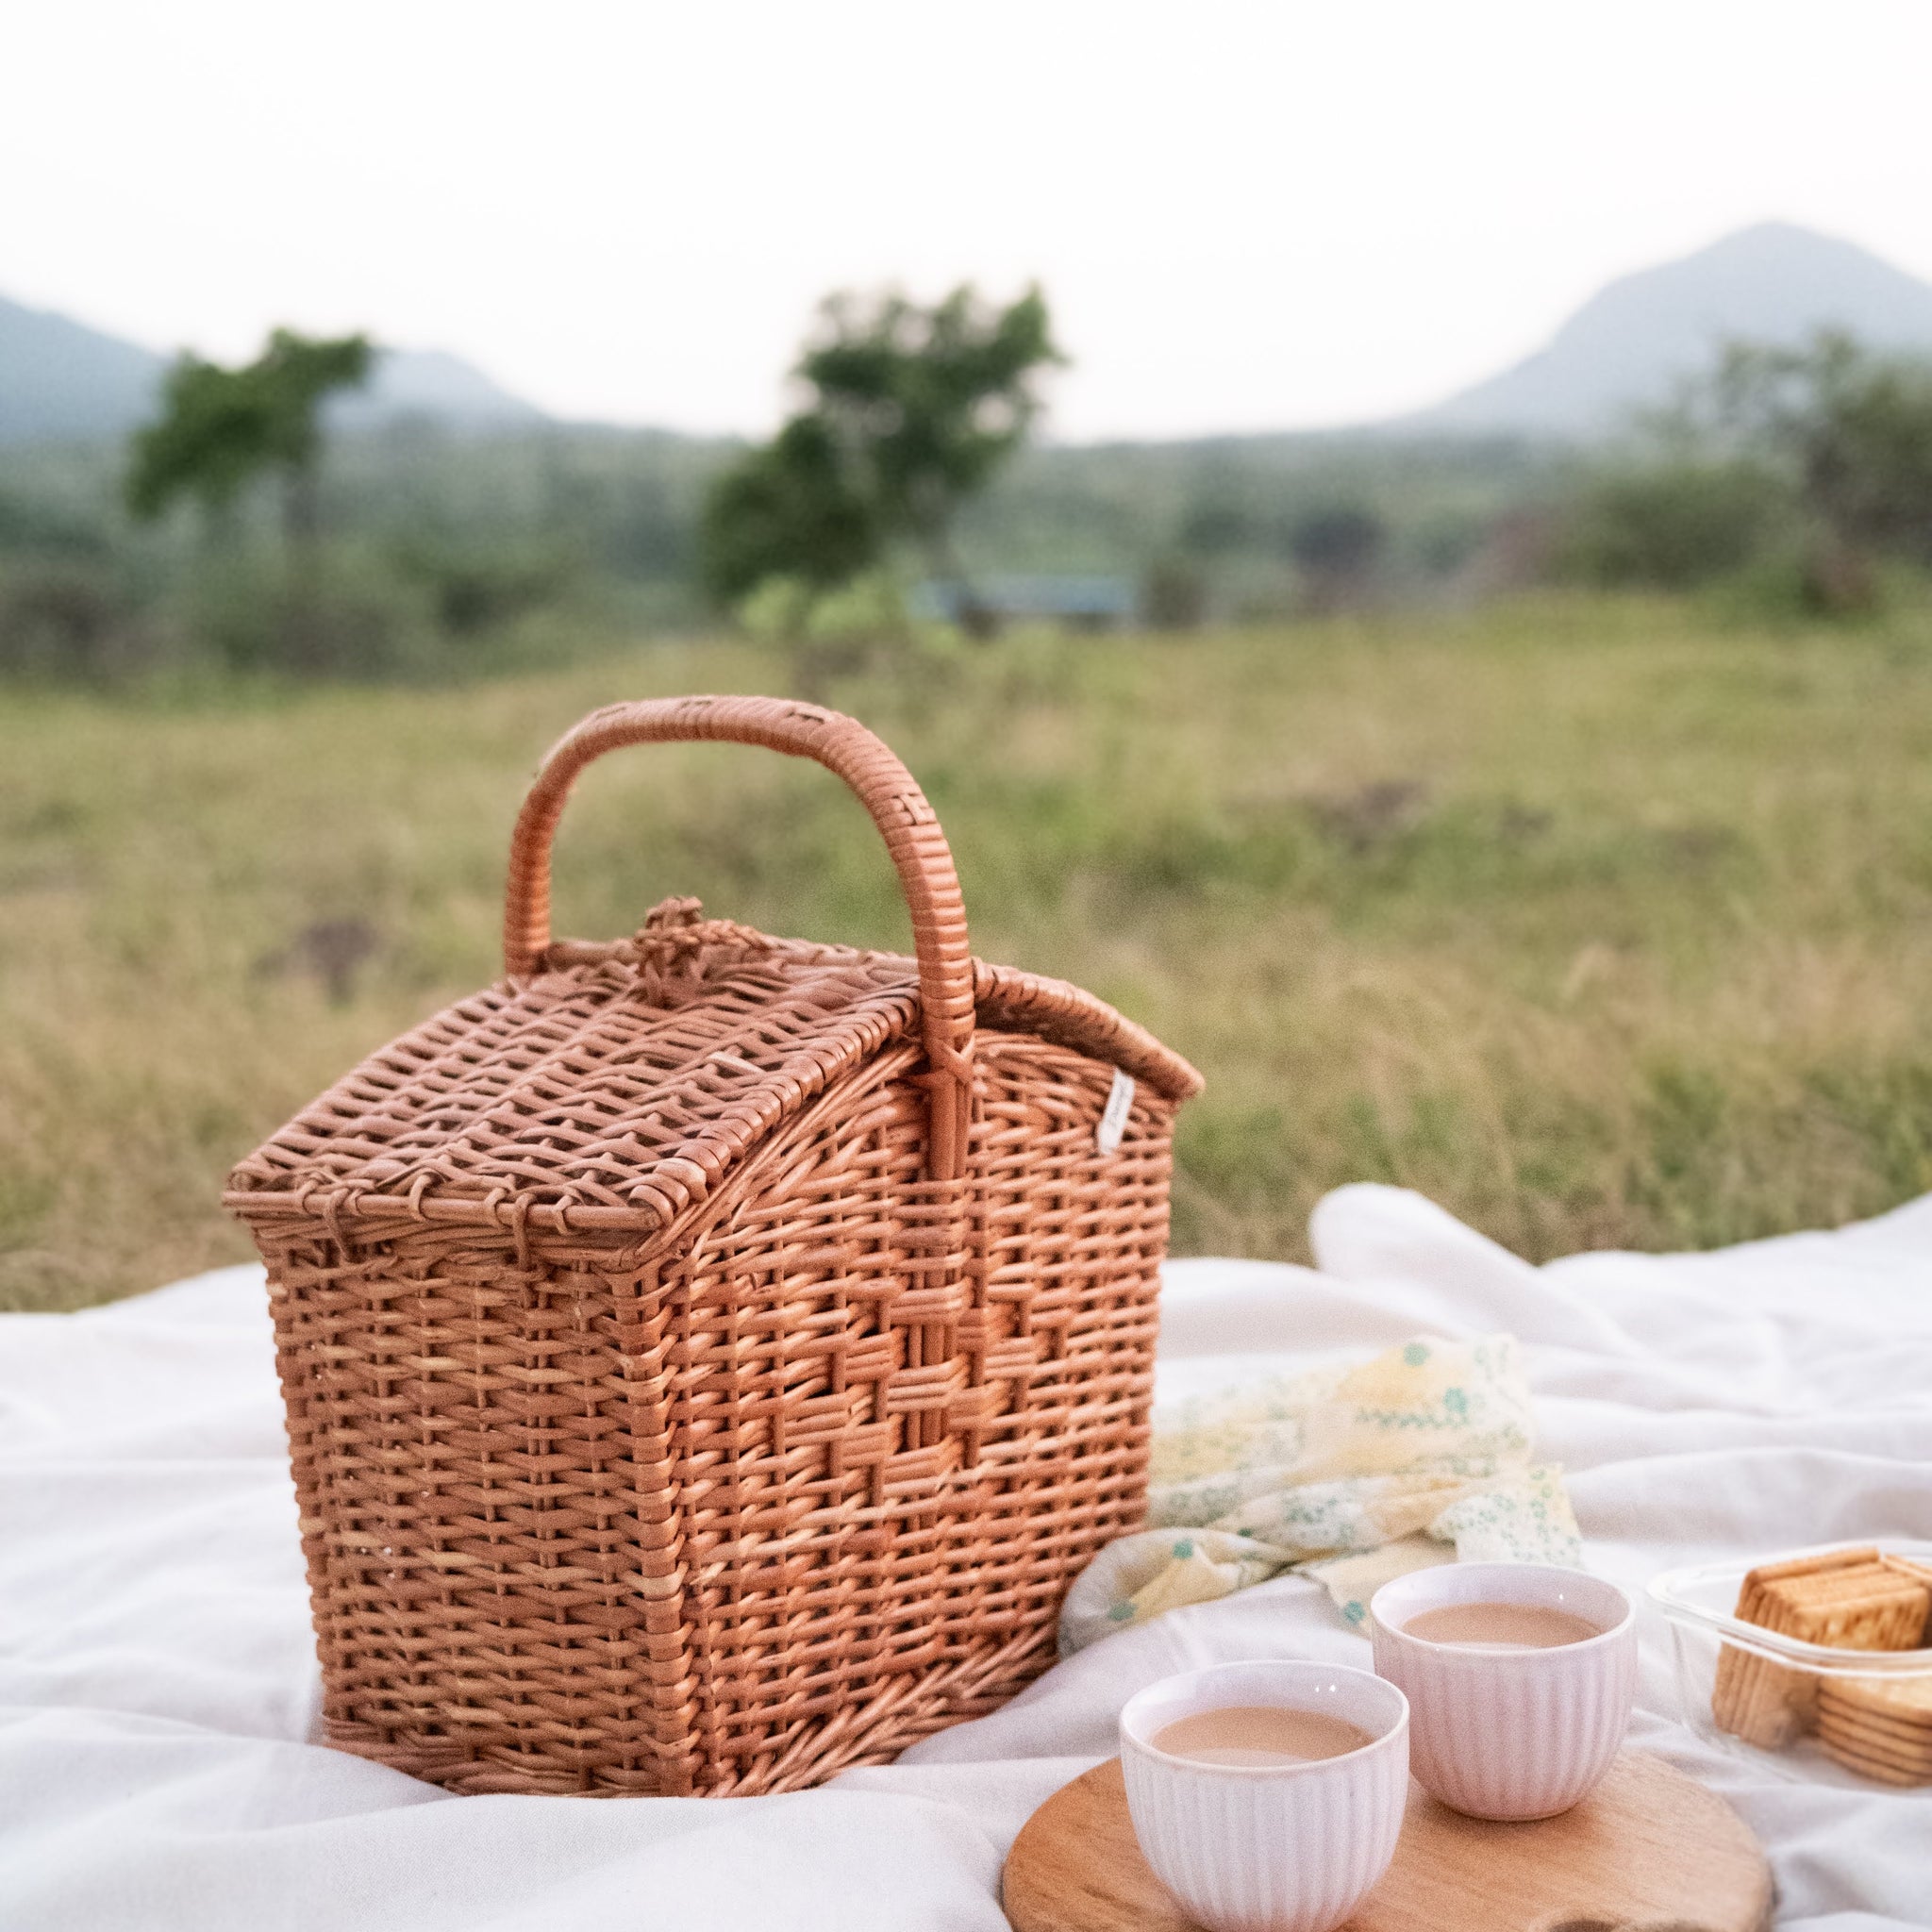 Picnic Day: The DaisyLife Way!